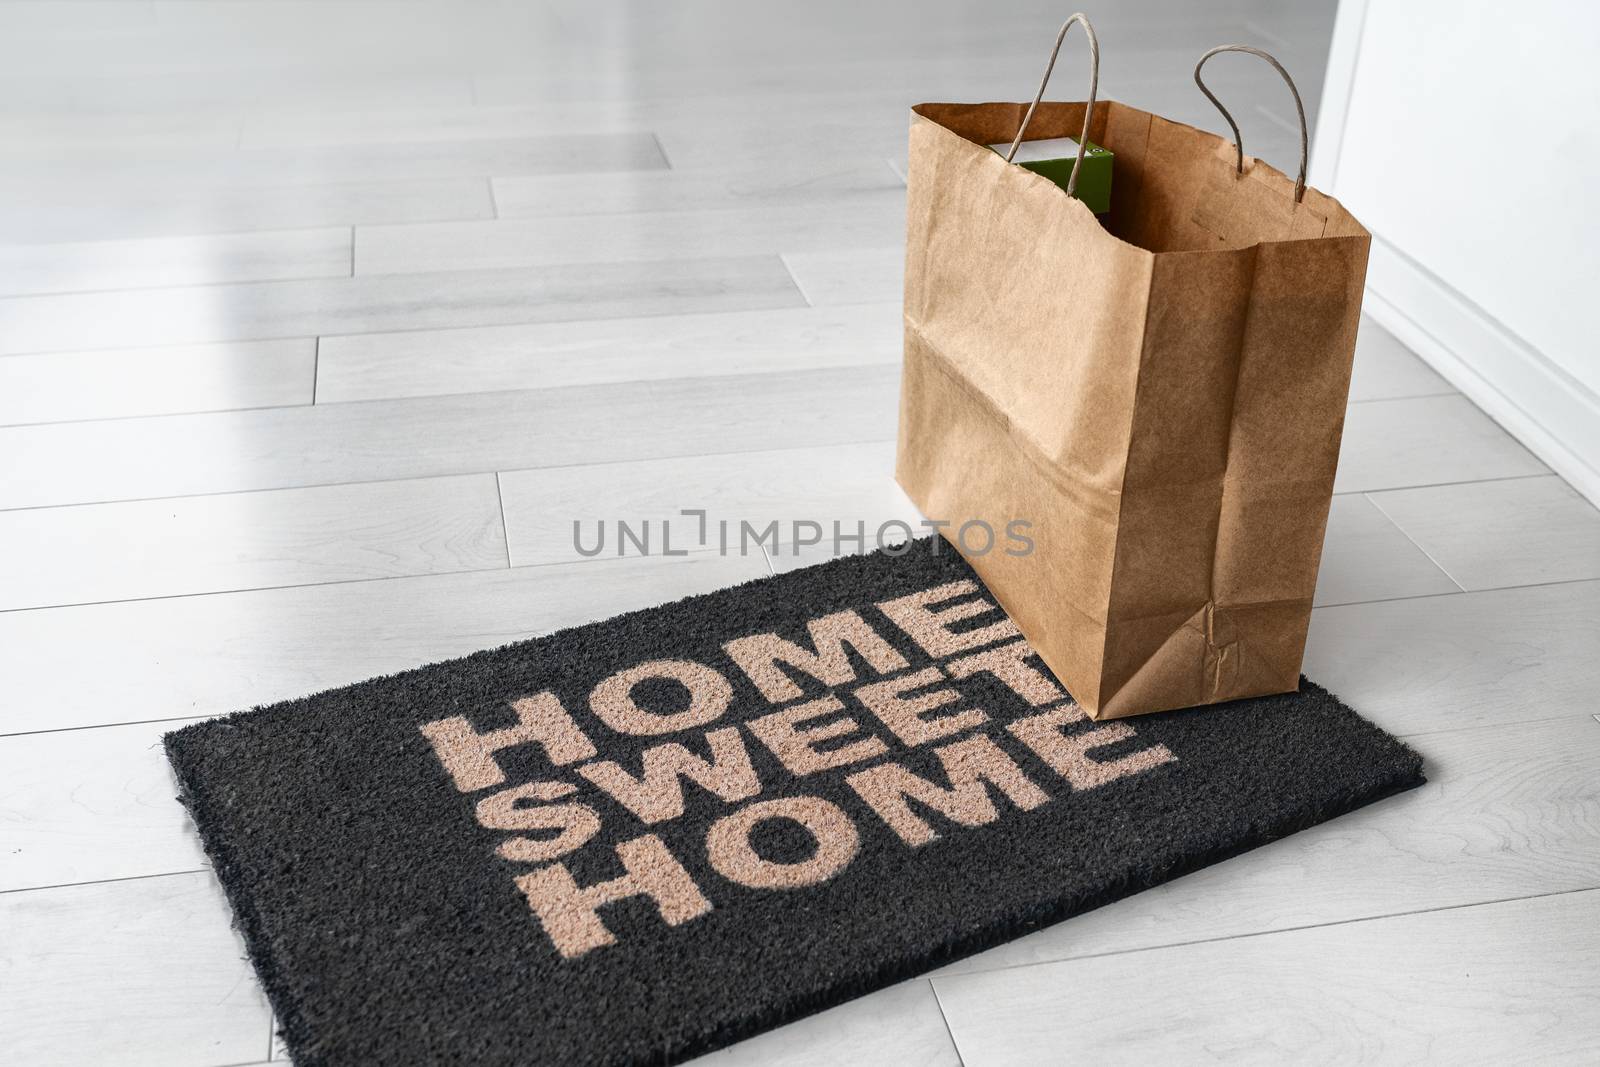 Home delivery of food grocery bag left at door entrance mat for Corona virus prevention safety. Precaution measures against COVID-19, paper shopping bag delivered without contact by Maridav